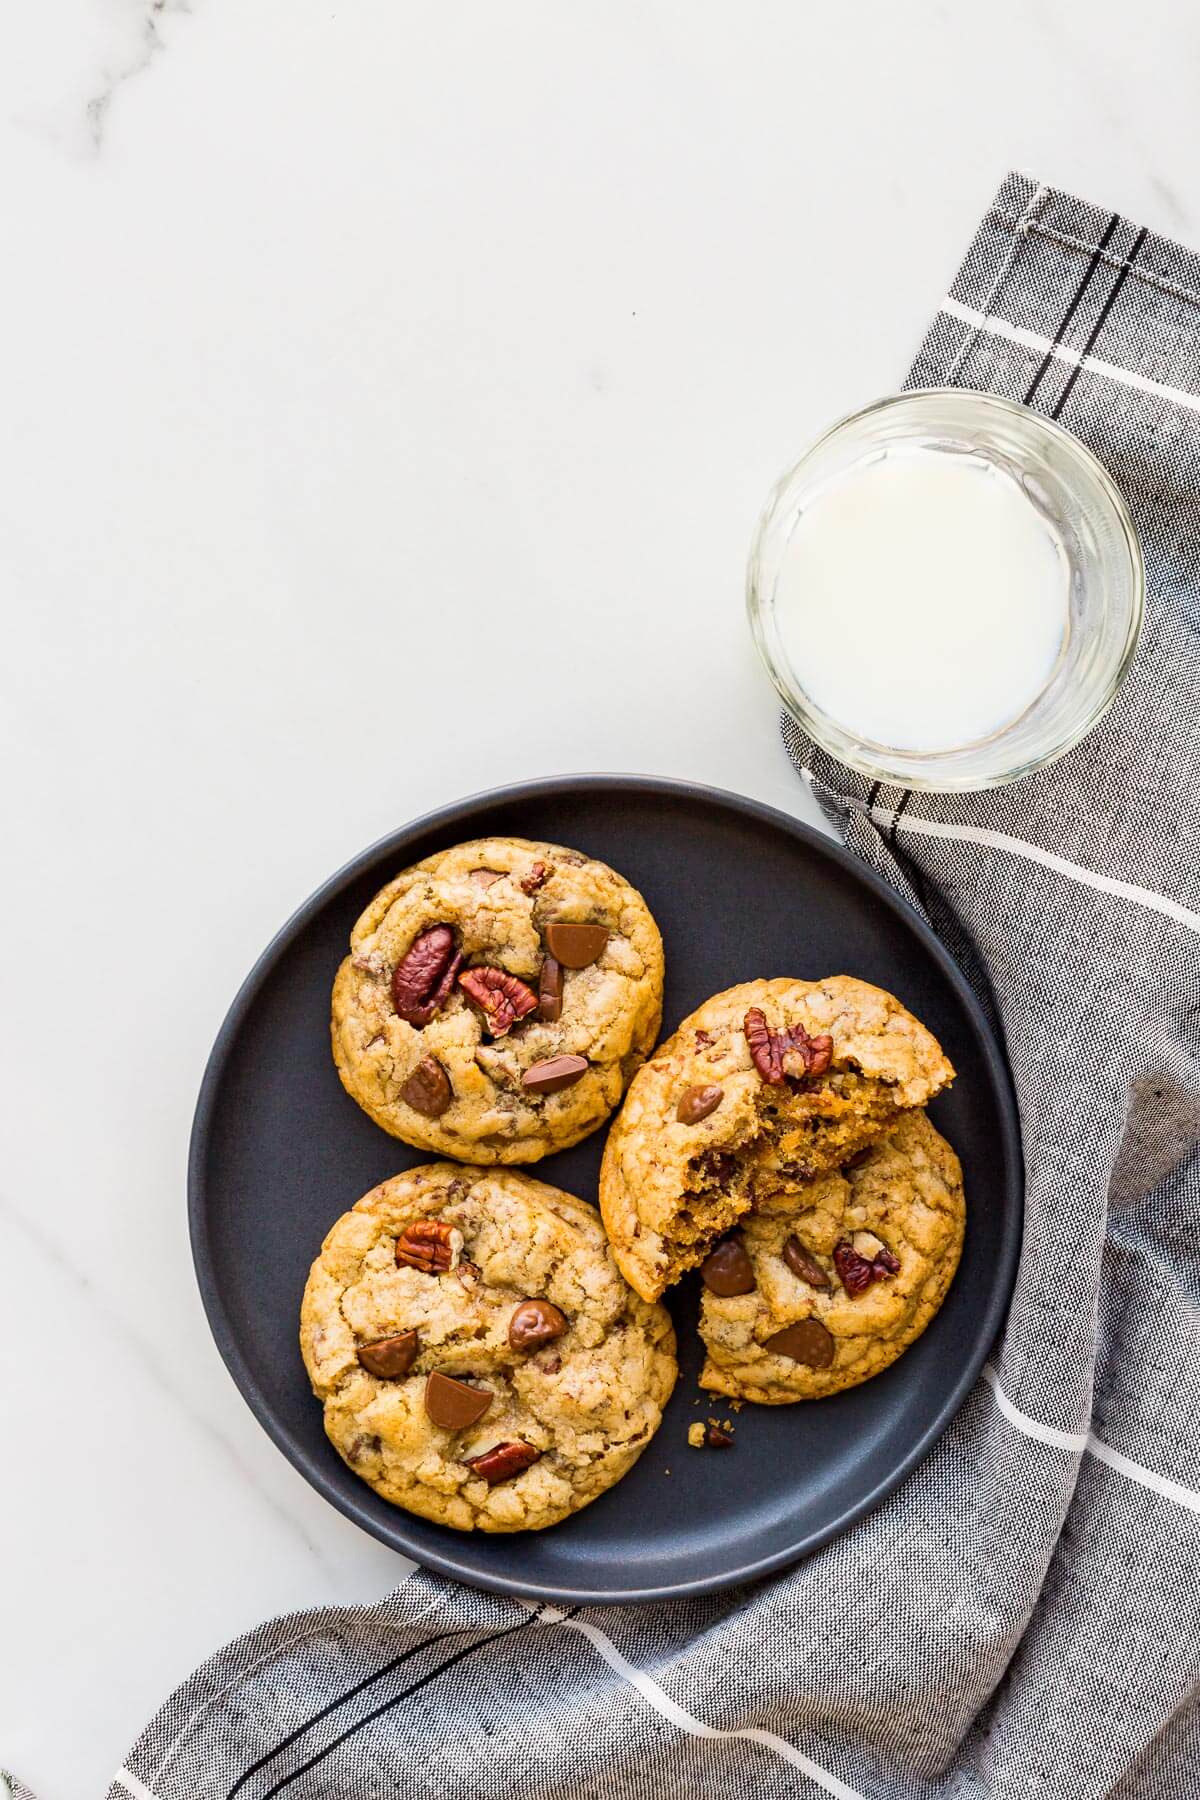 Chocolate chip cookies with pecans and chunks of milk chocolate on a black plate served with a glass of milk.